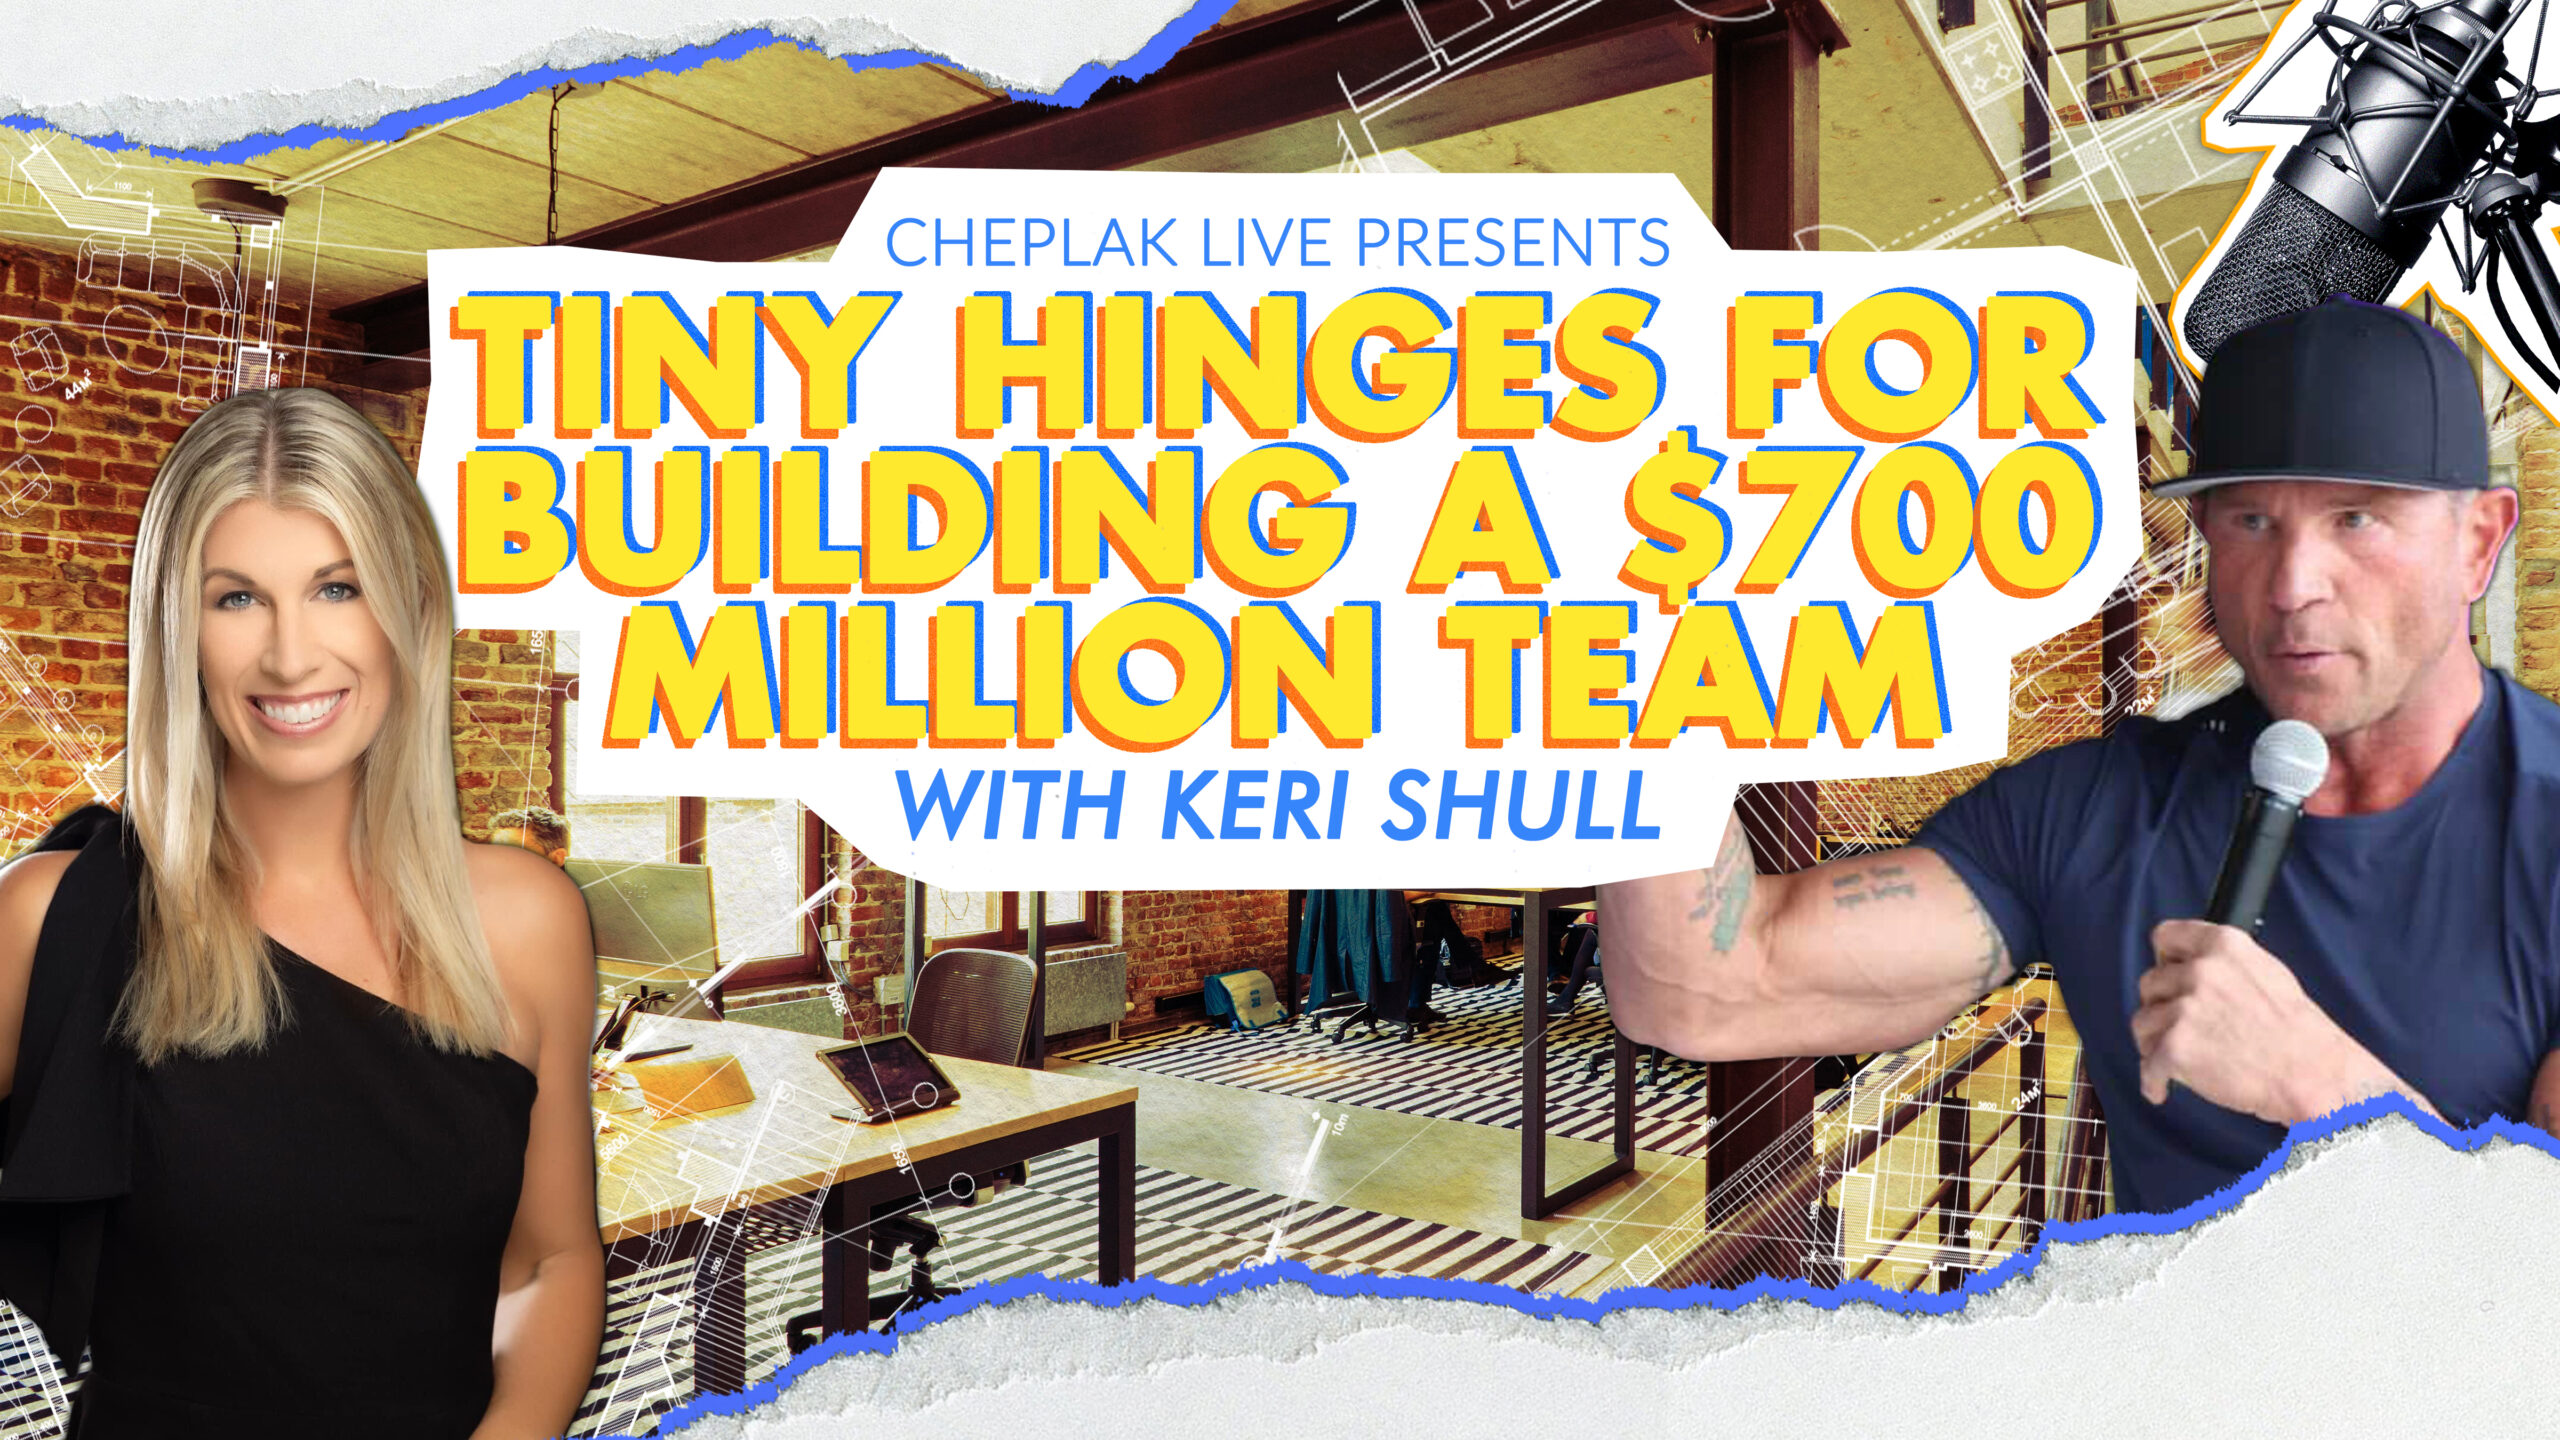 Tiny Hinges For Building a $700 Million Team